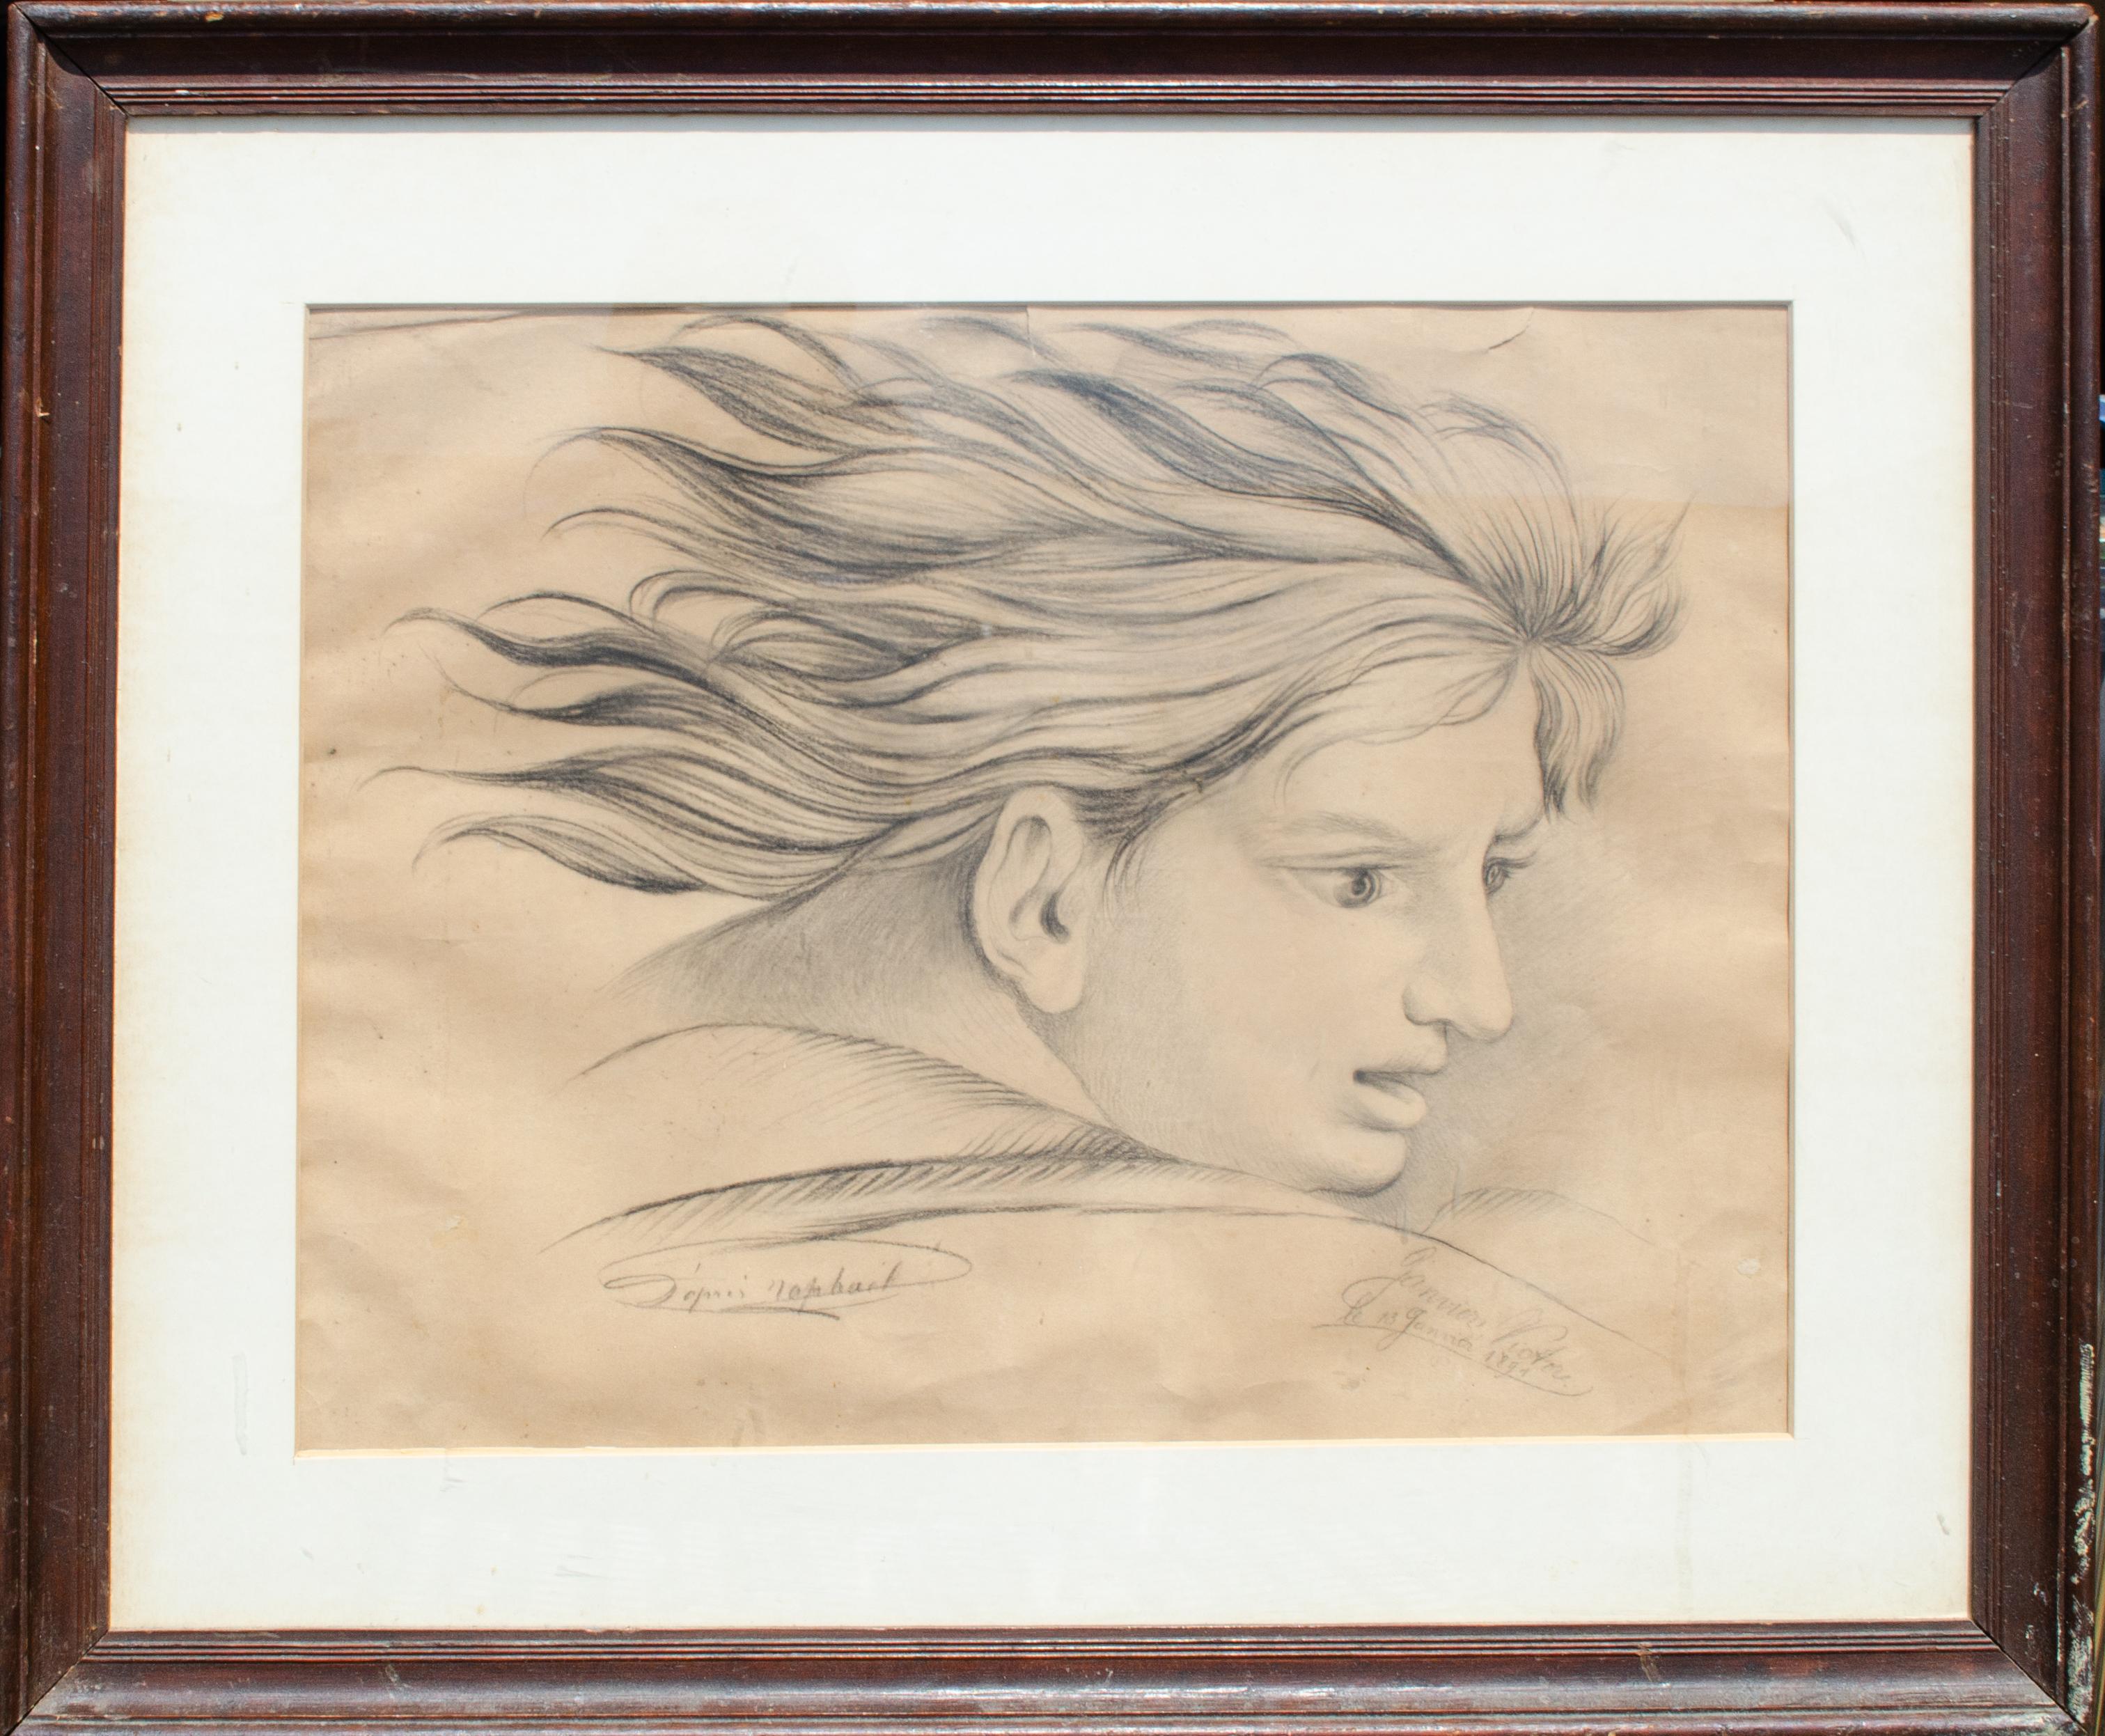 Untitled, 1894
Graphite on paper
Sight: 13 1/2 x 17 in.
Framed: 20 x 24 x 1 in.
Signed and dated lower right, inscribed lower left